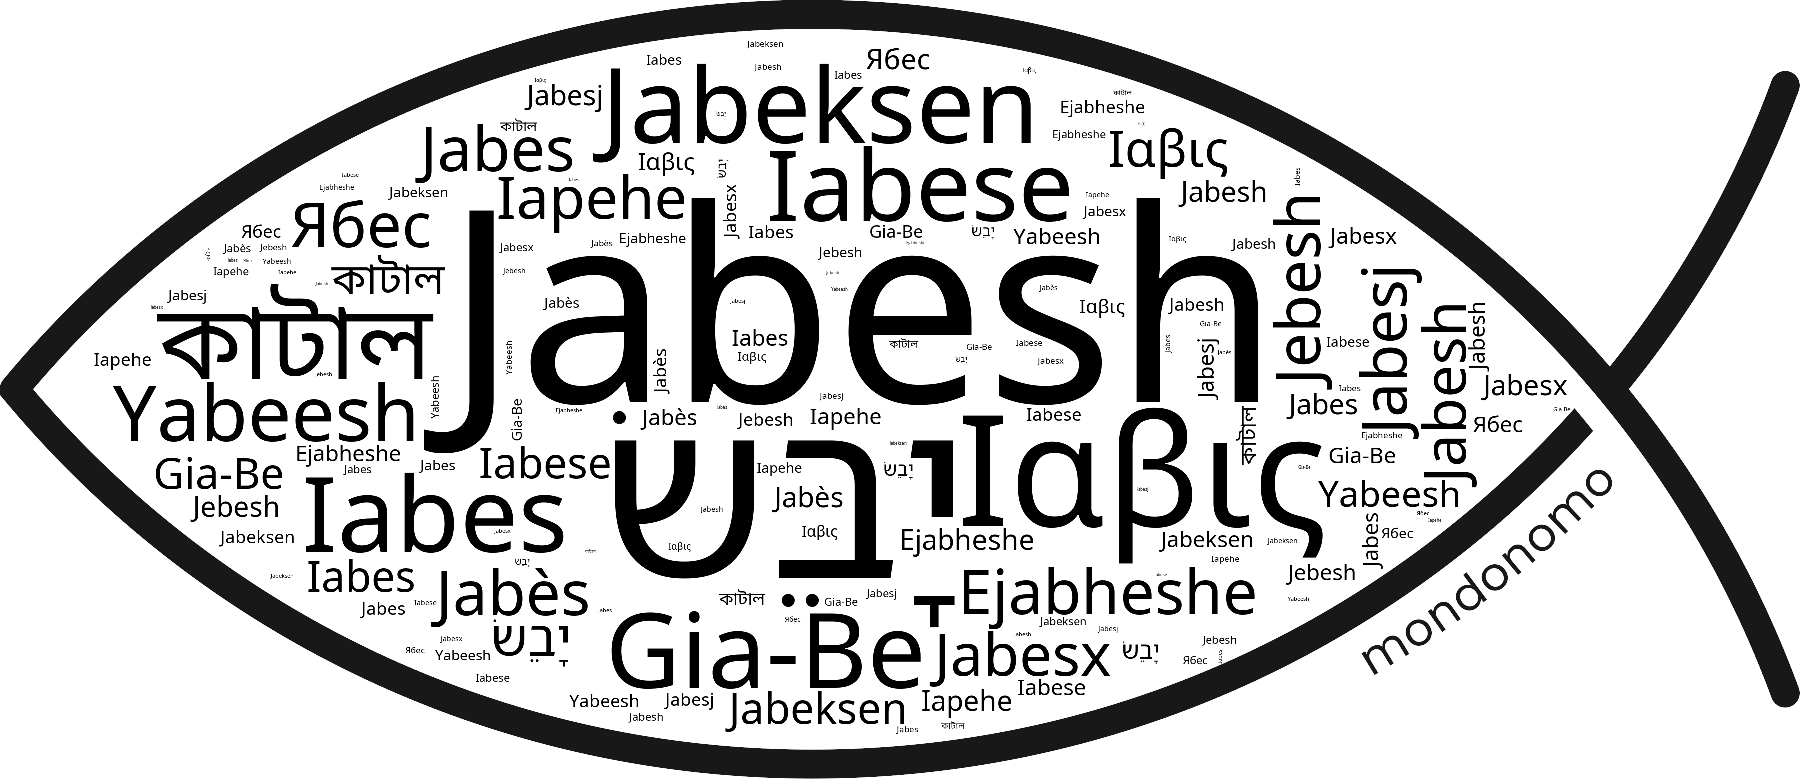 Name Jabesh in the world's Bibles